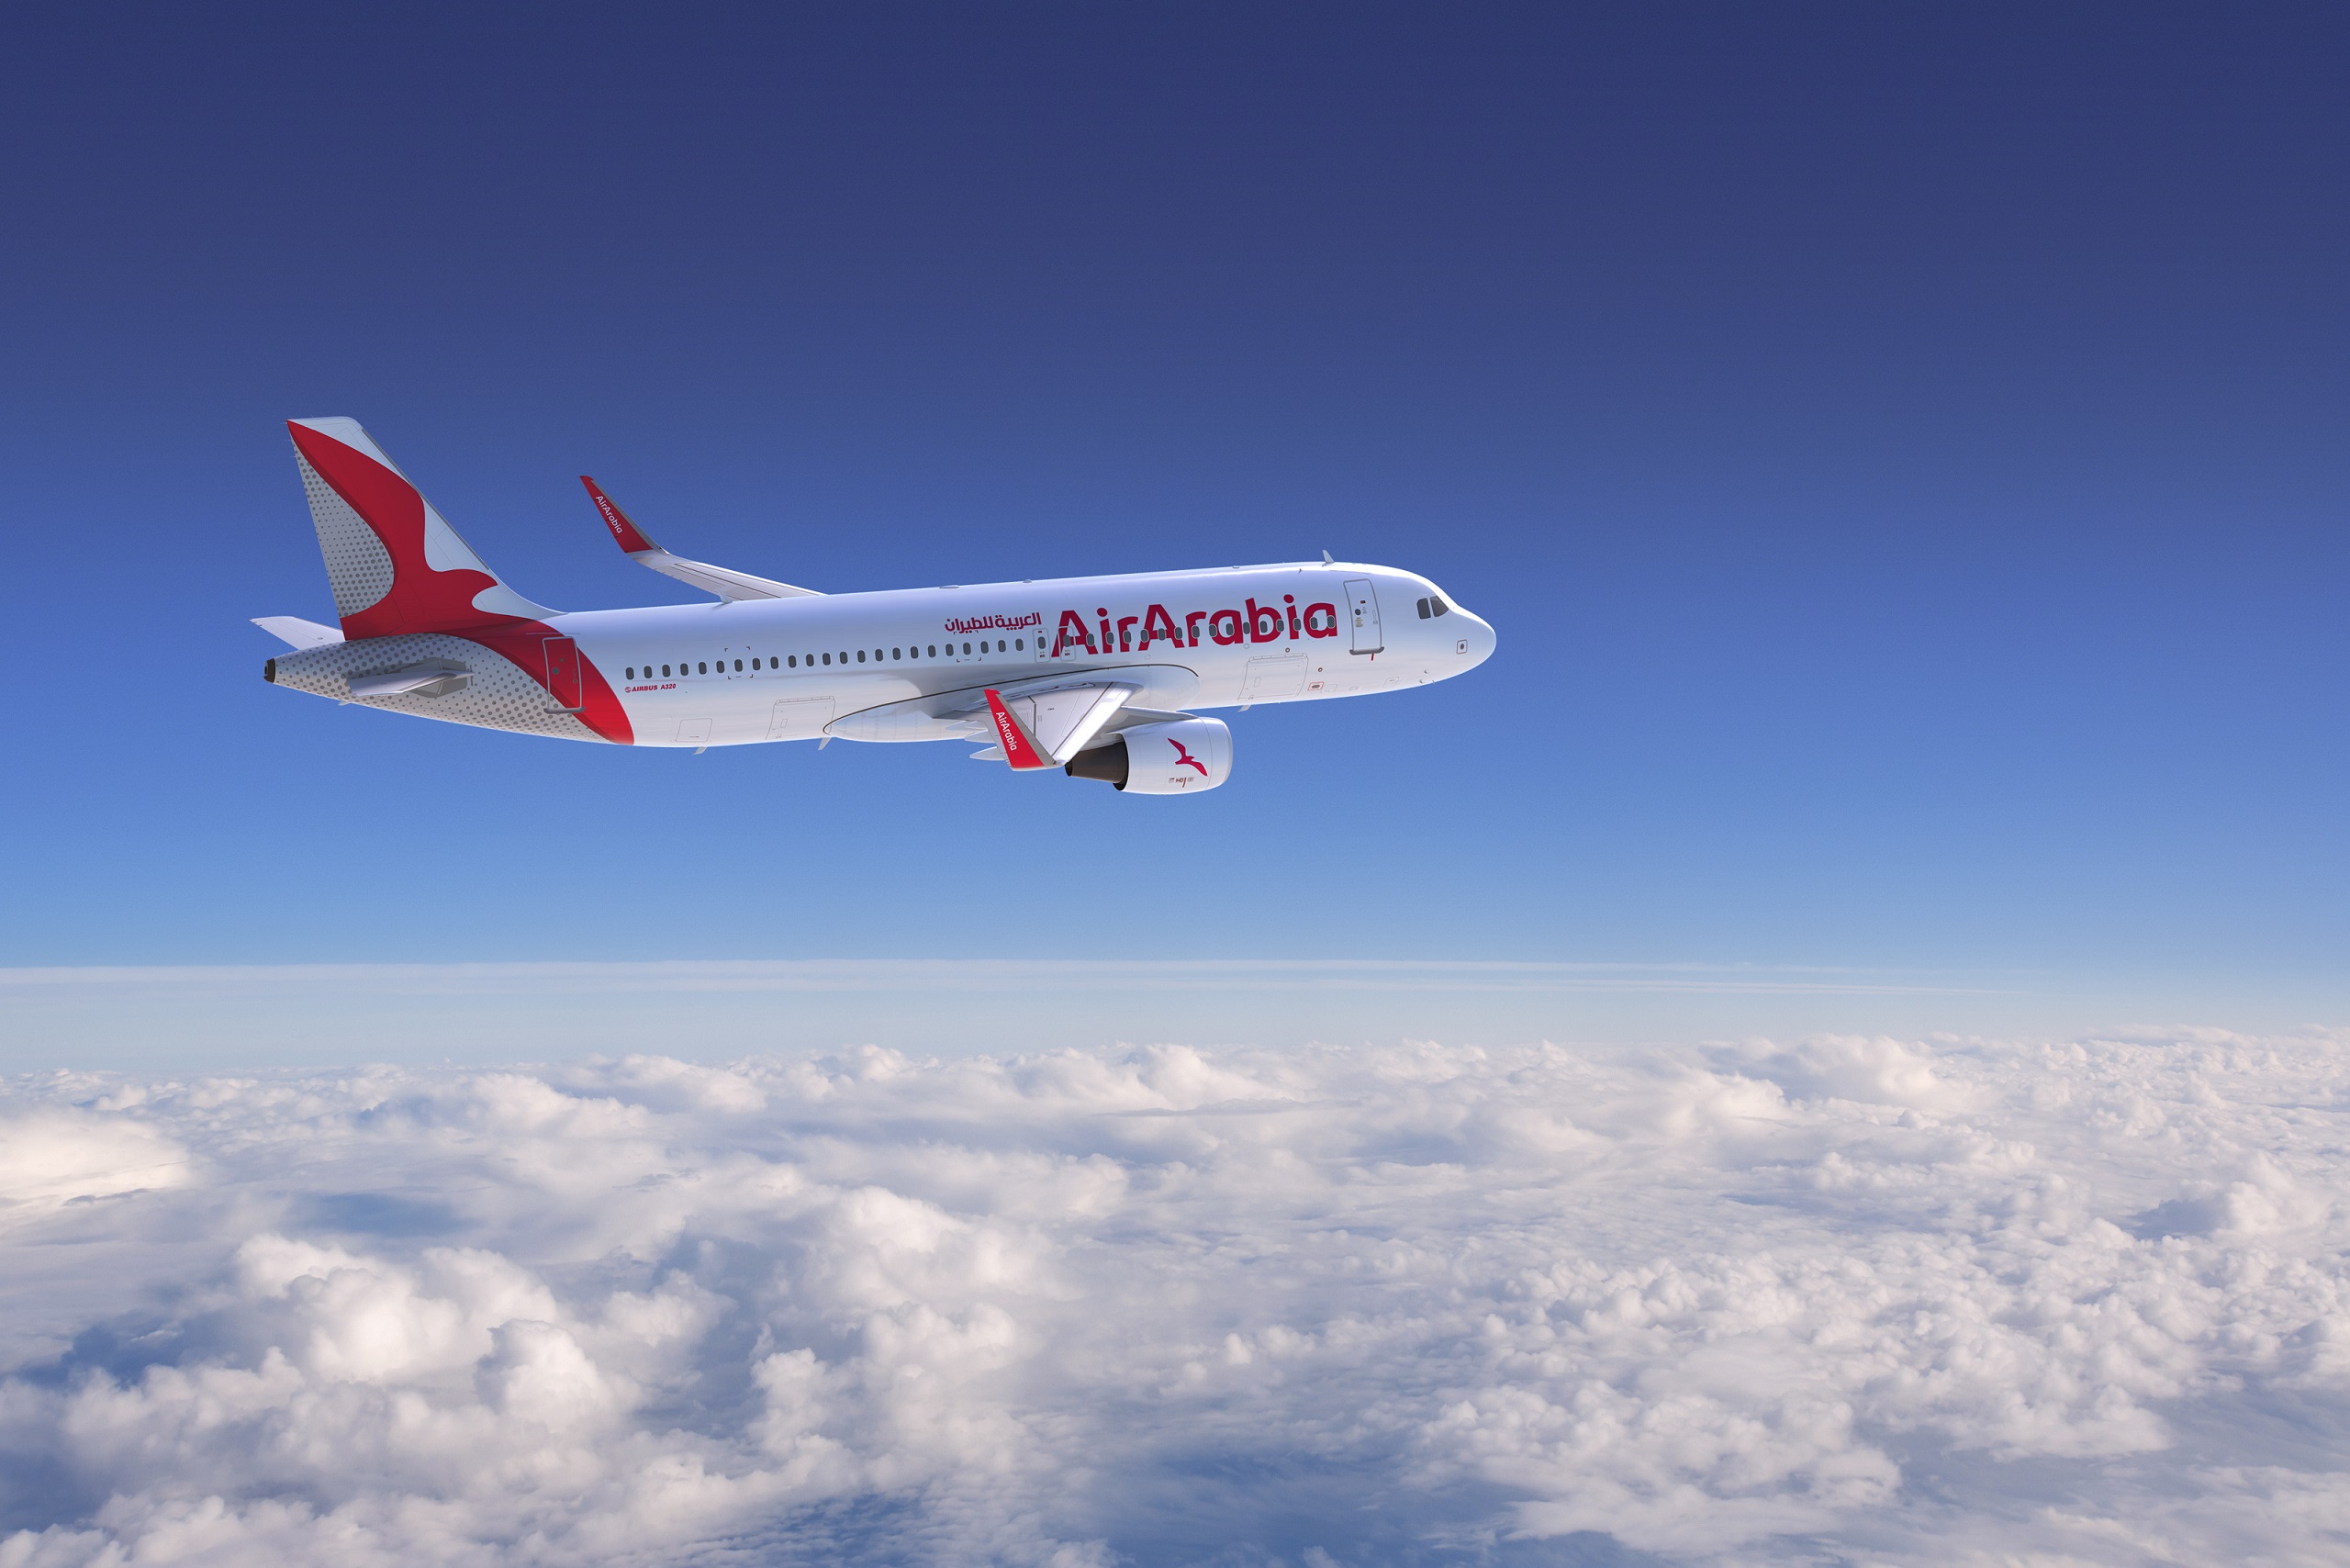 Air Arabia Abu Dhabi Expands Operations To Pakistan; Launches New Flights To Faisalabad And Multan